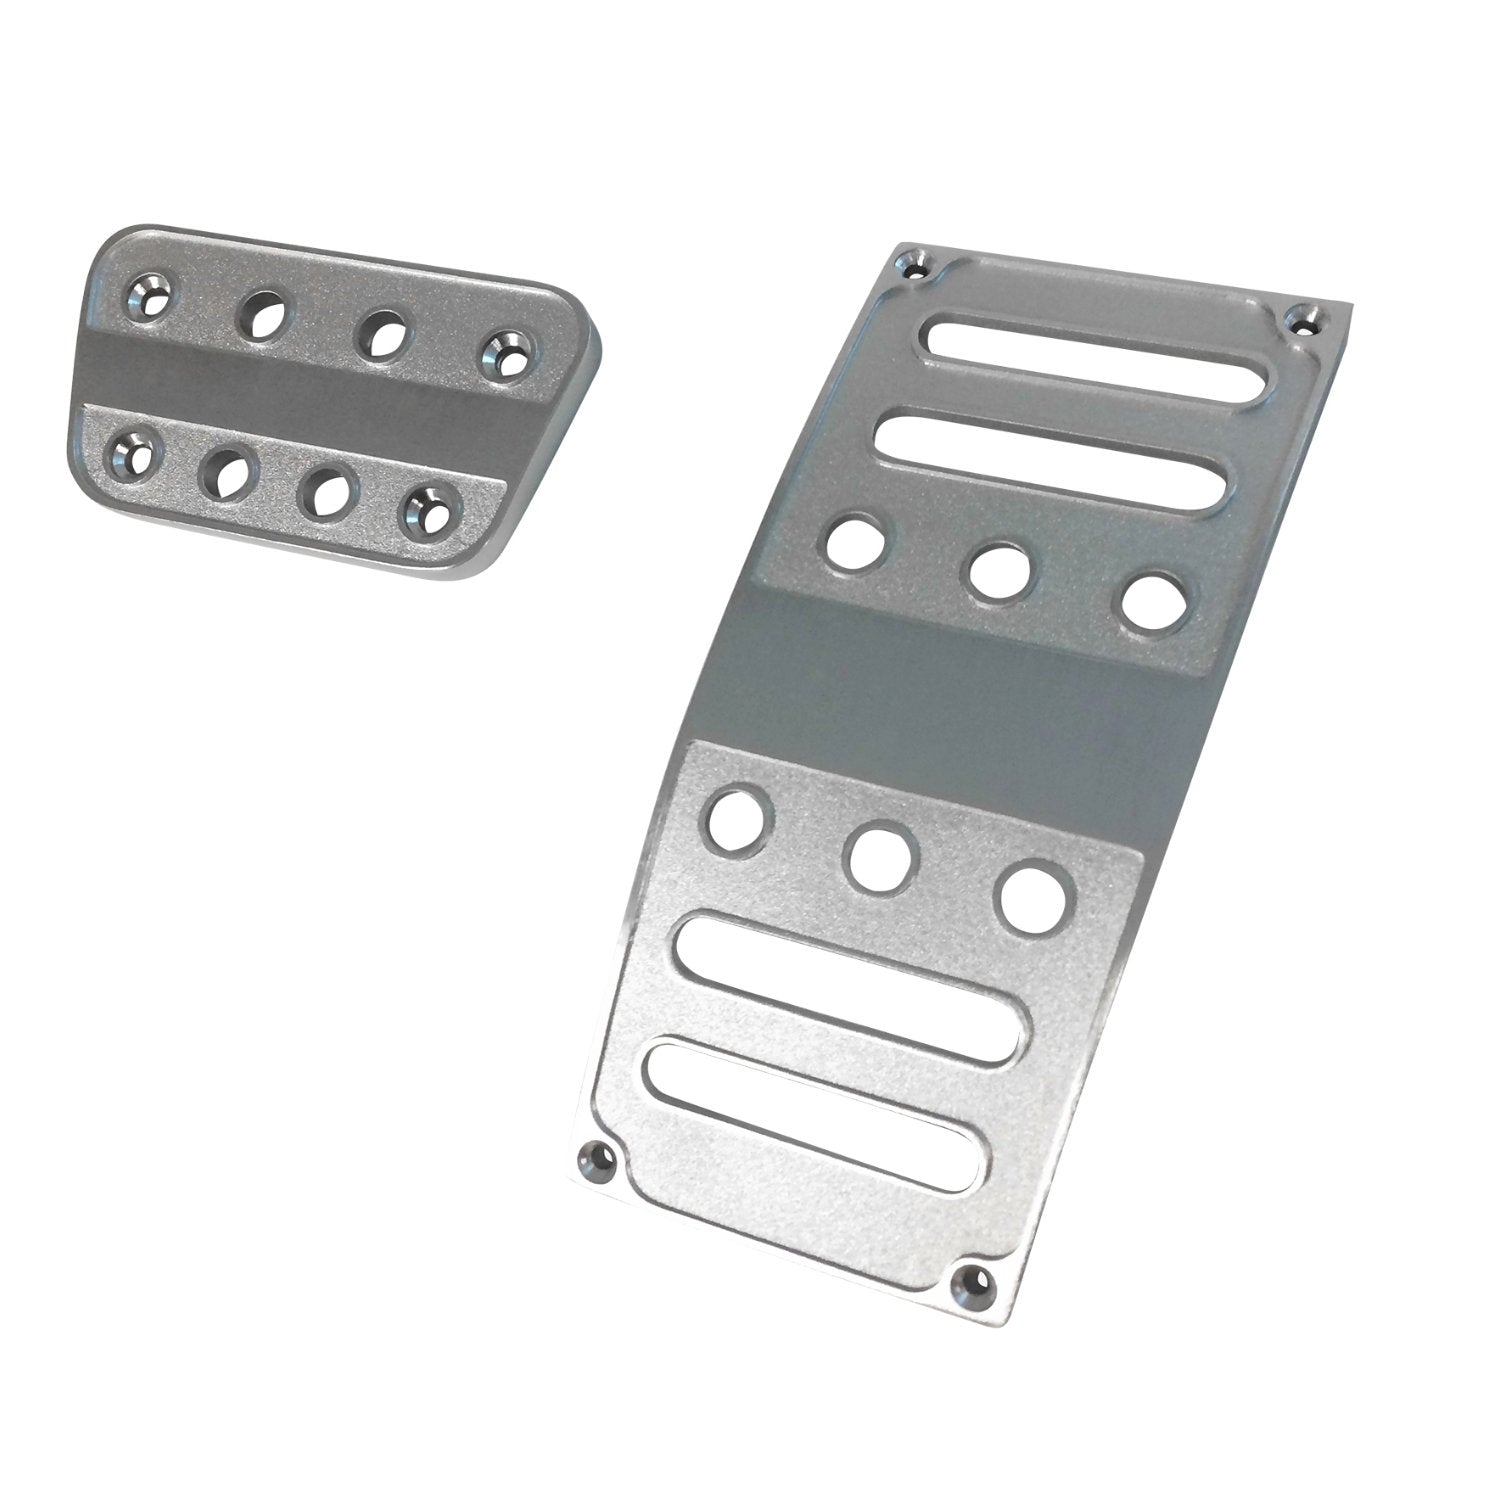 Drake 2005-23 Billet Pedal Covers - Automatic